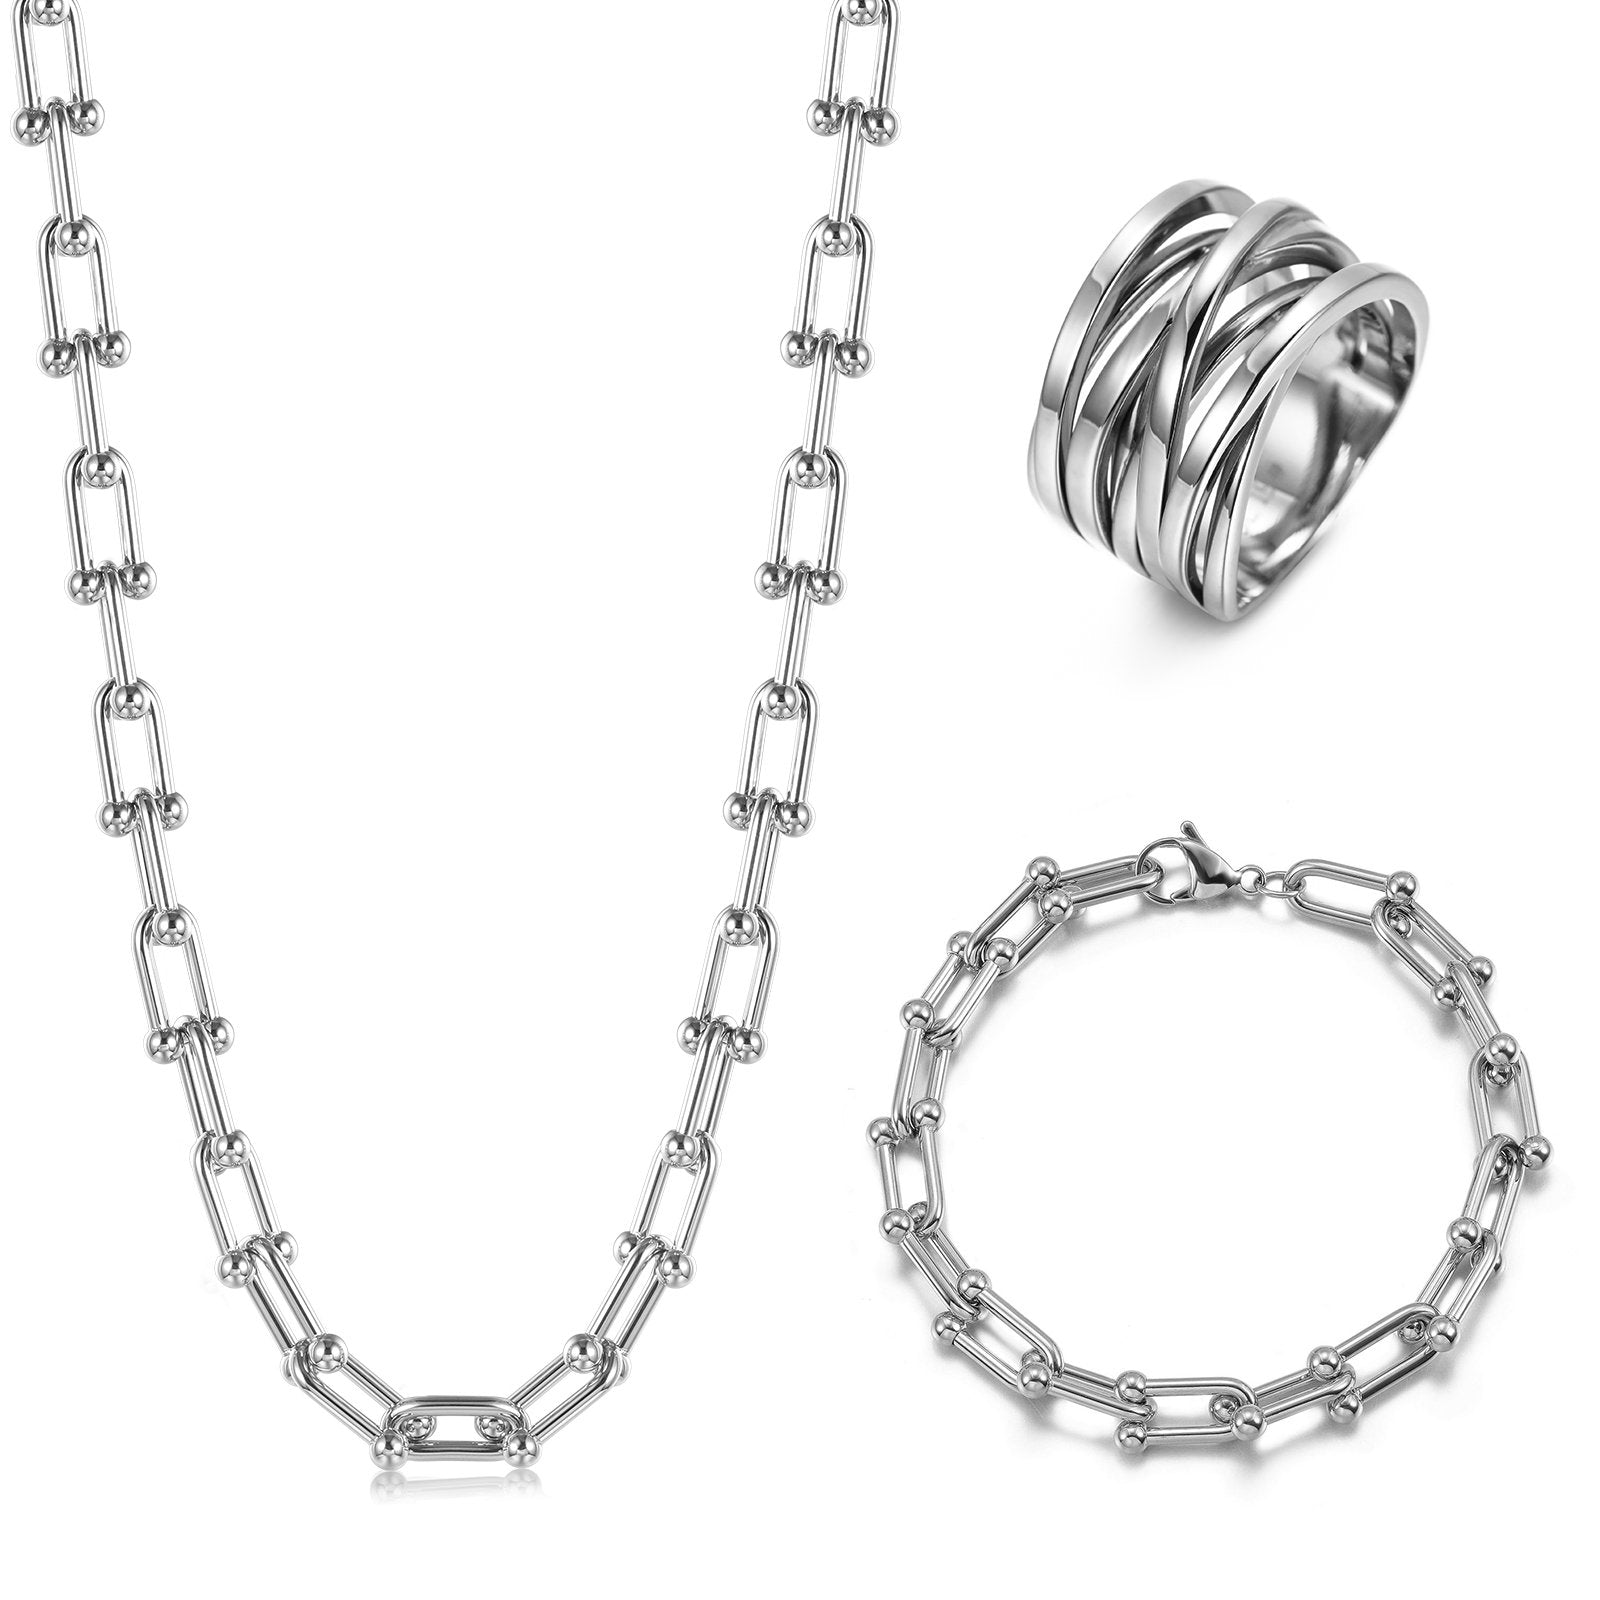 Silver Le Cheval necklace, bracelet and ring set